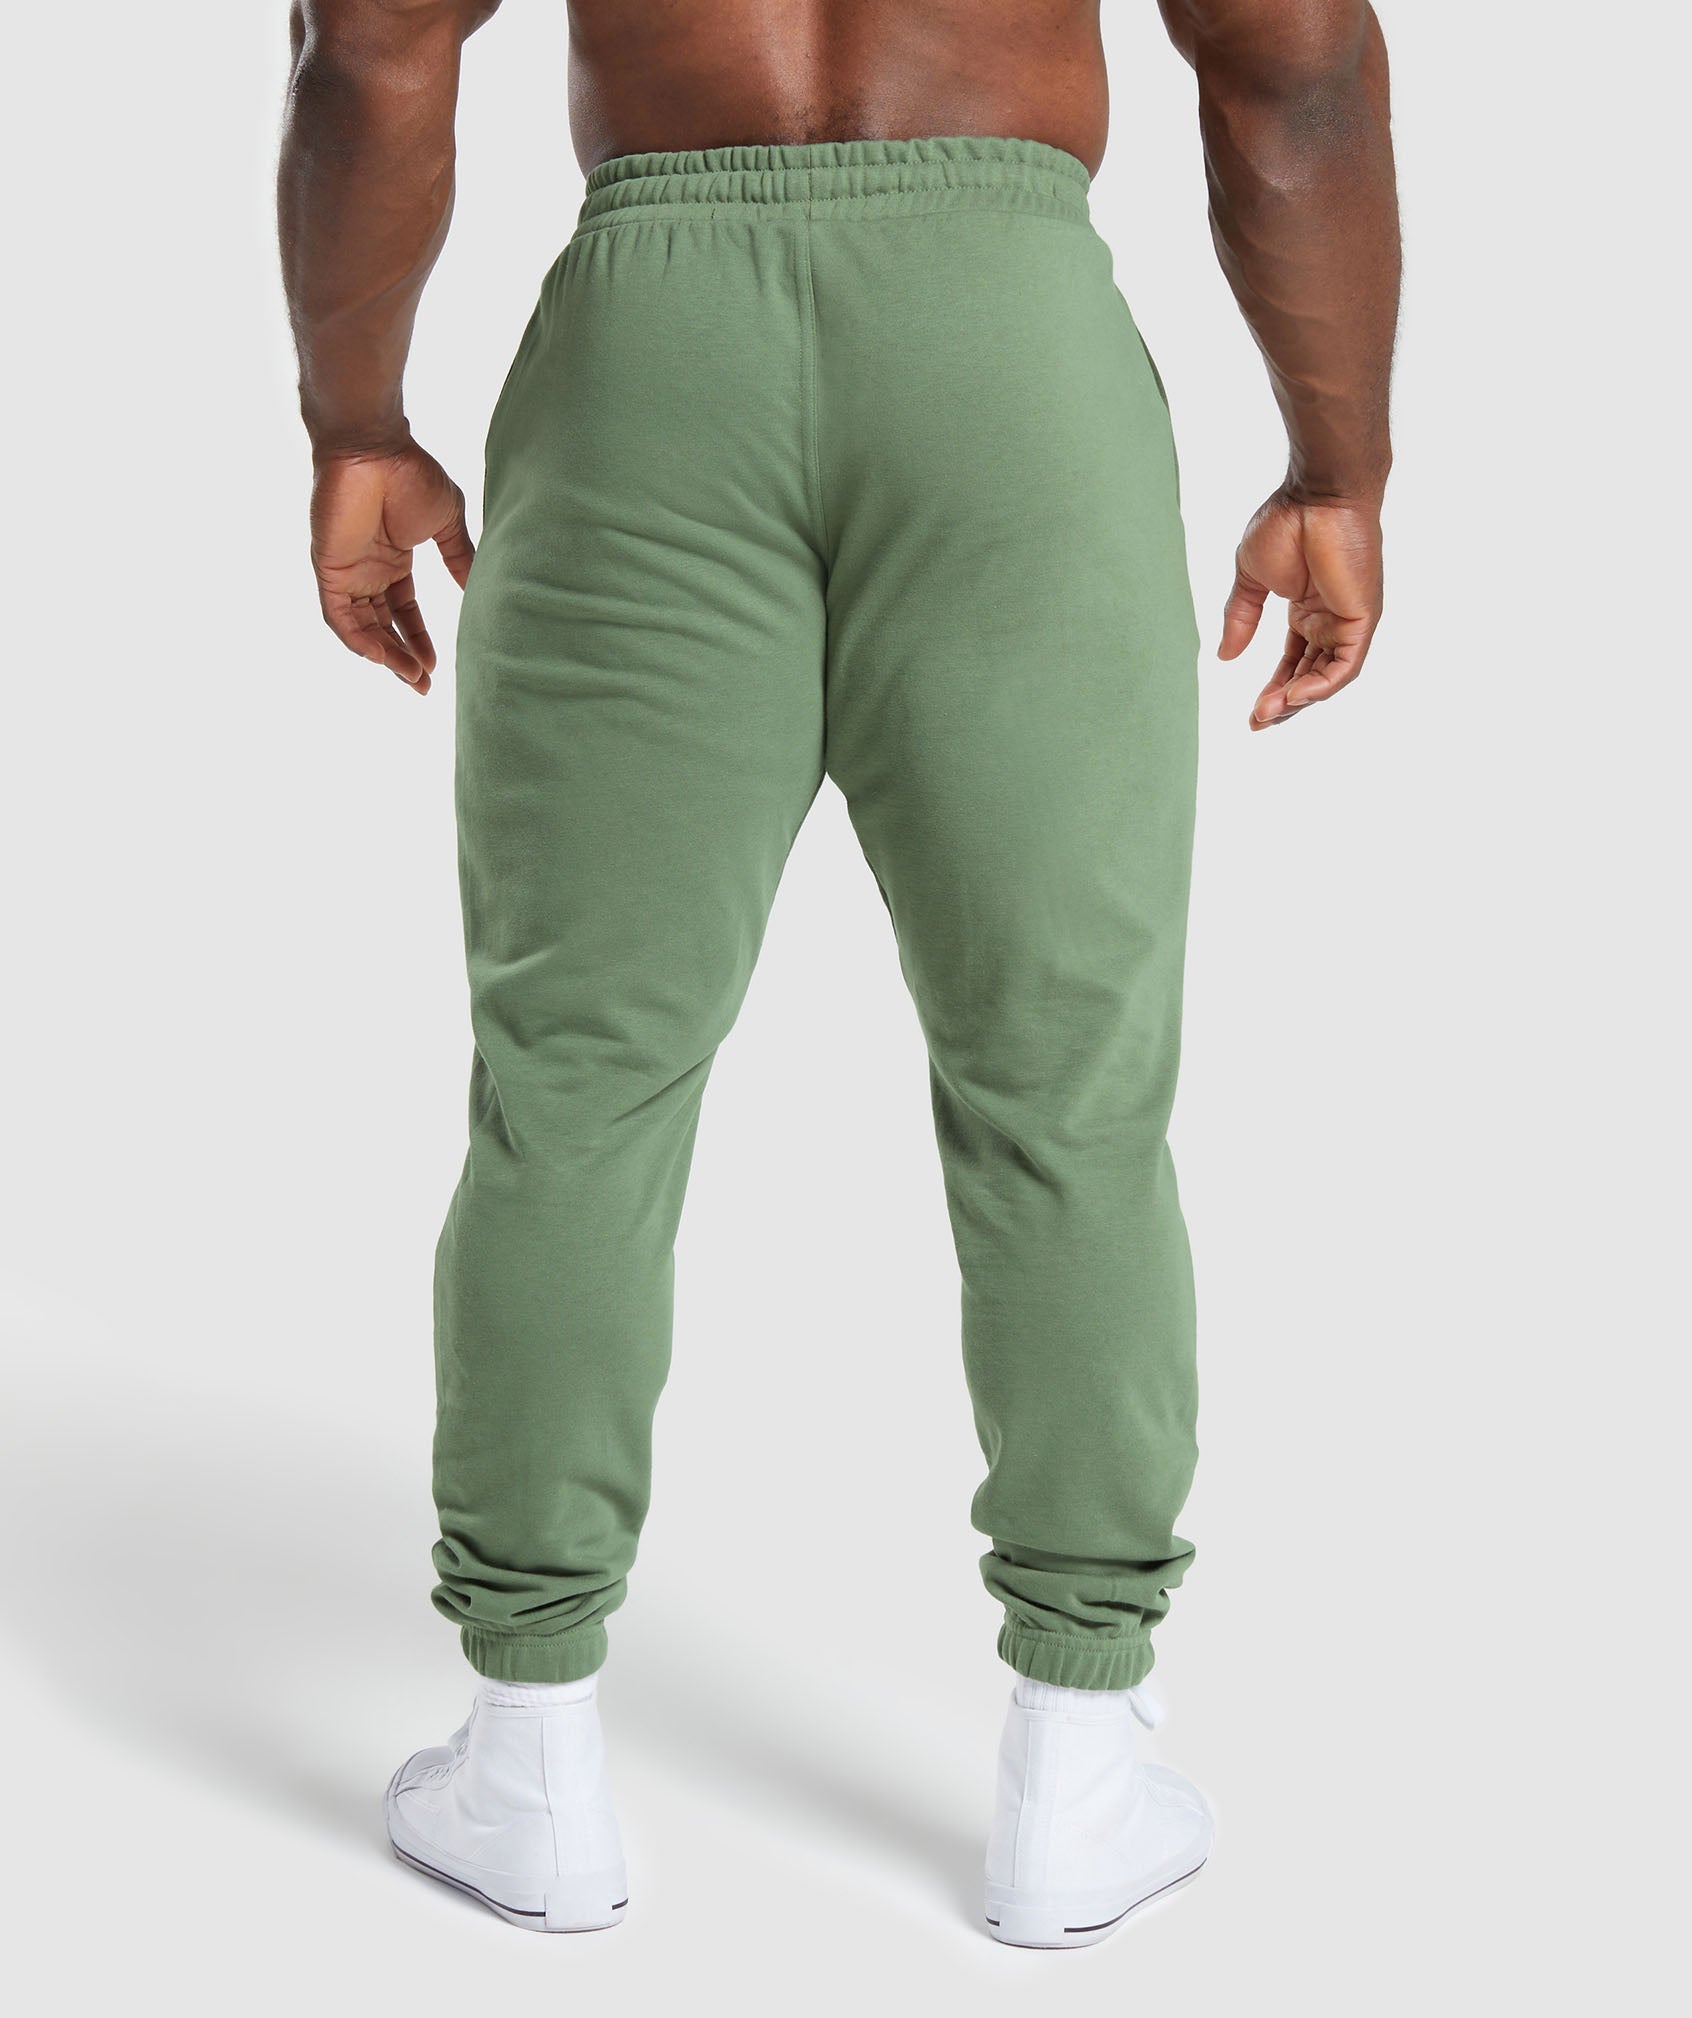 CO, Statement Ribbed Joggers- Olive, Gym Jogger Men